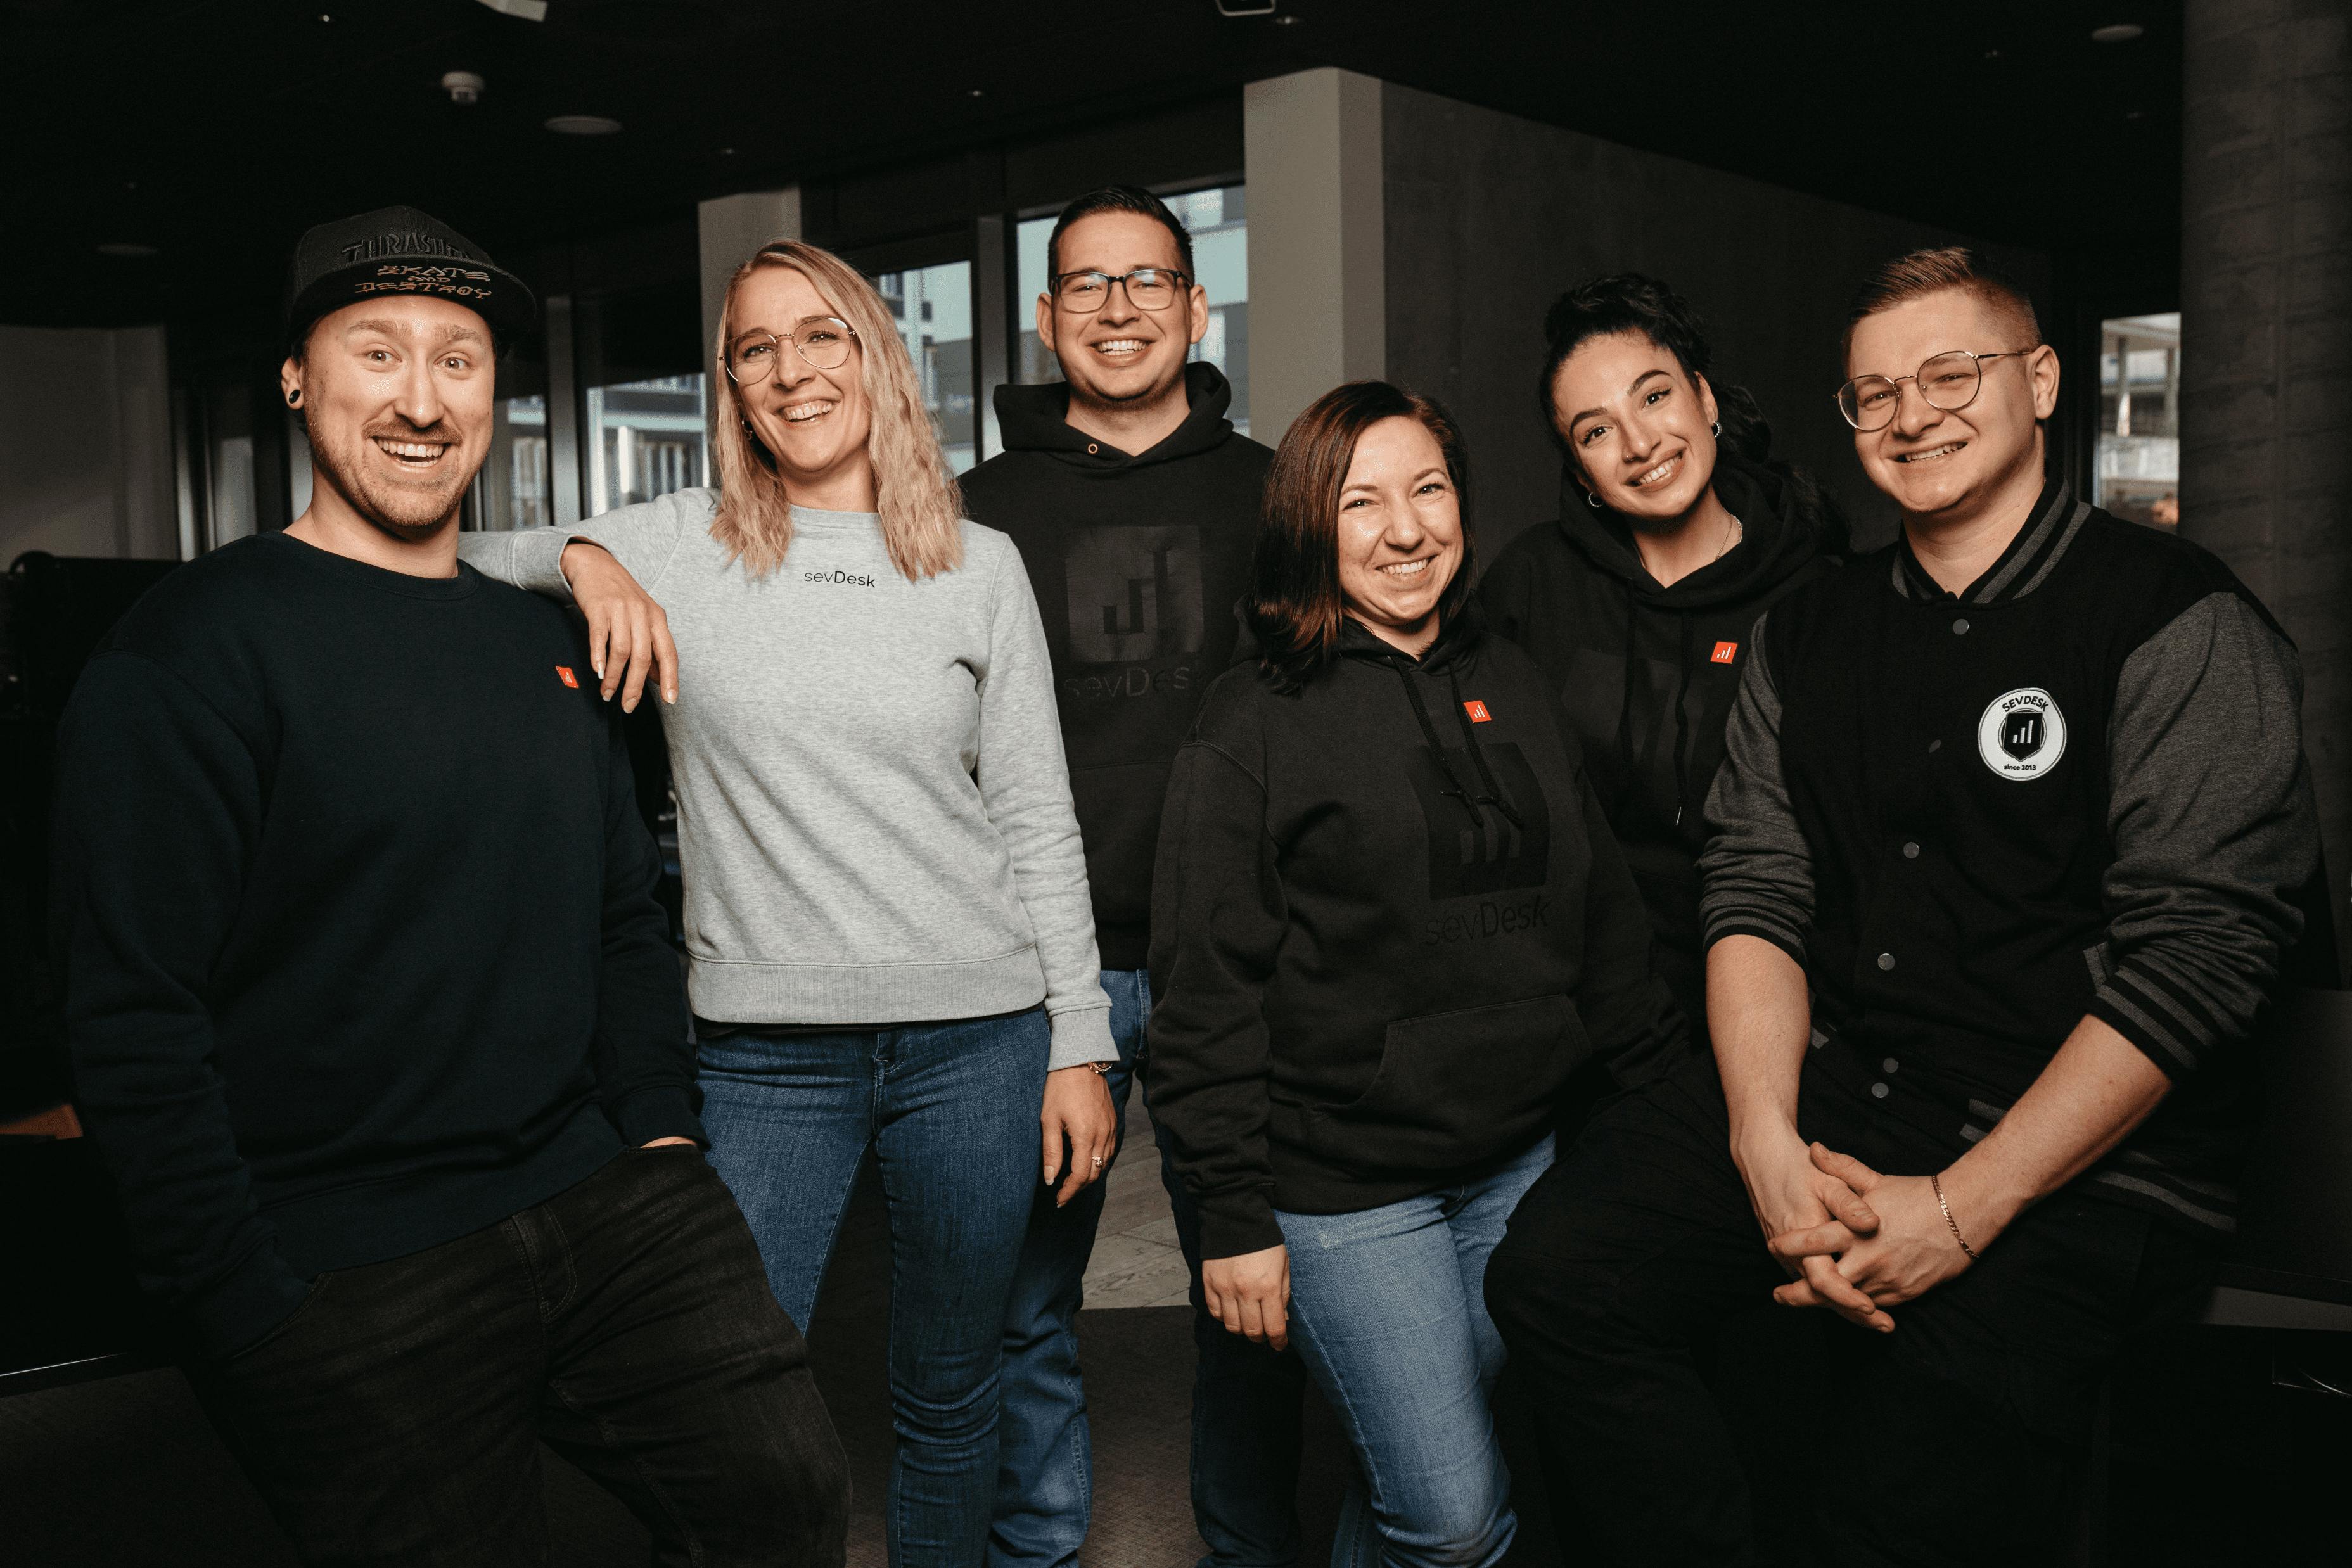 Meet our Customer Success Managers